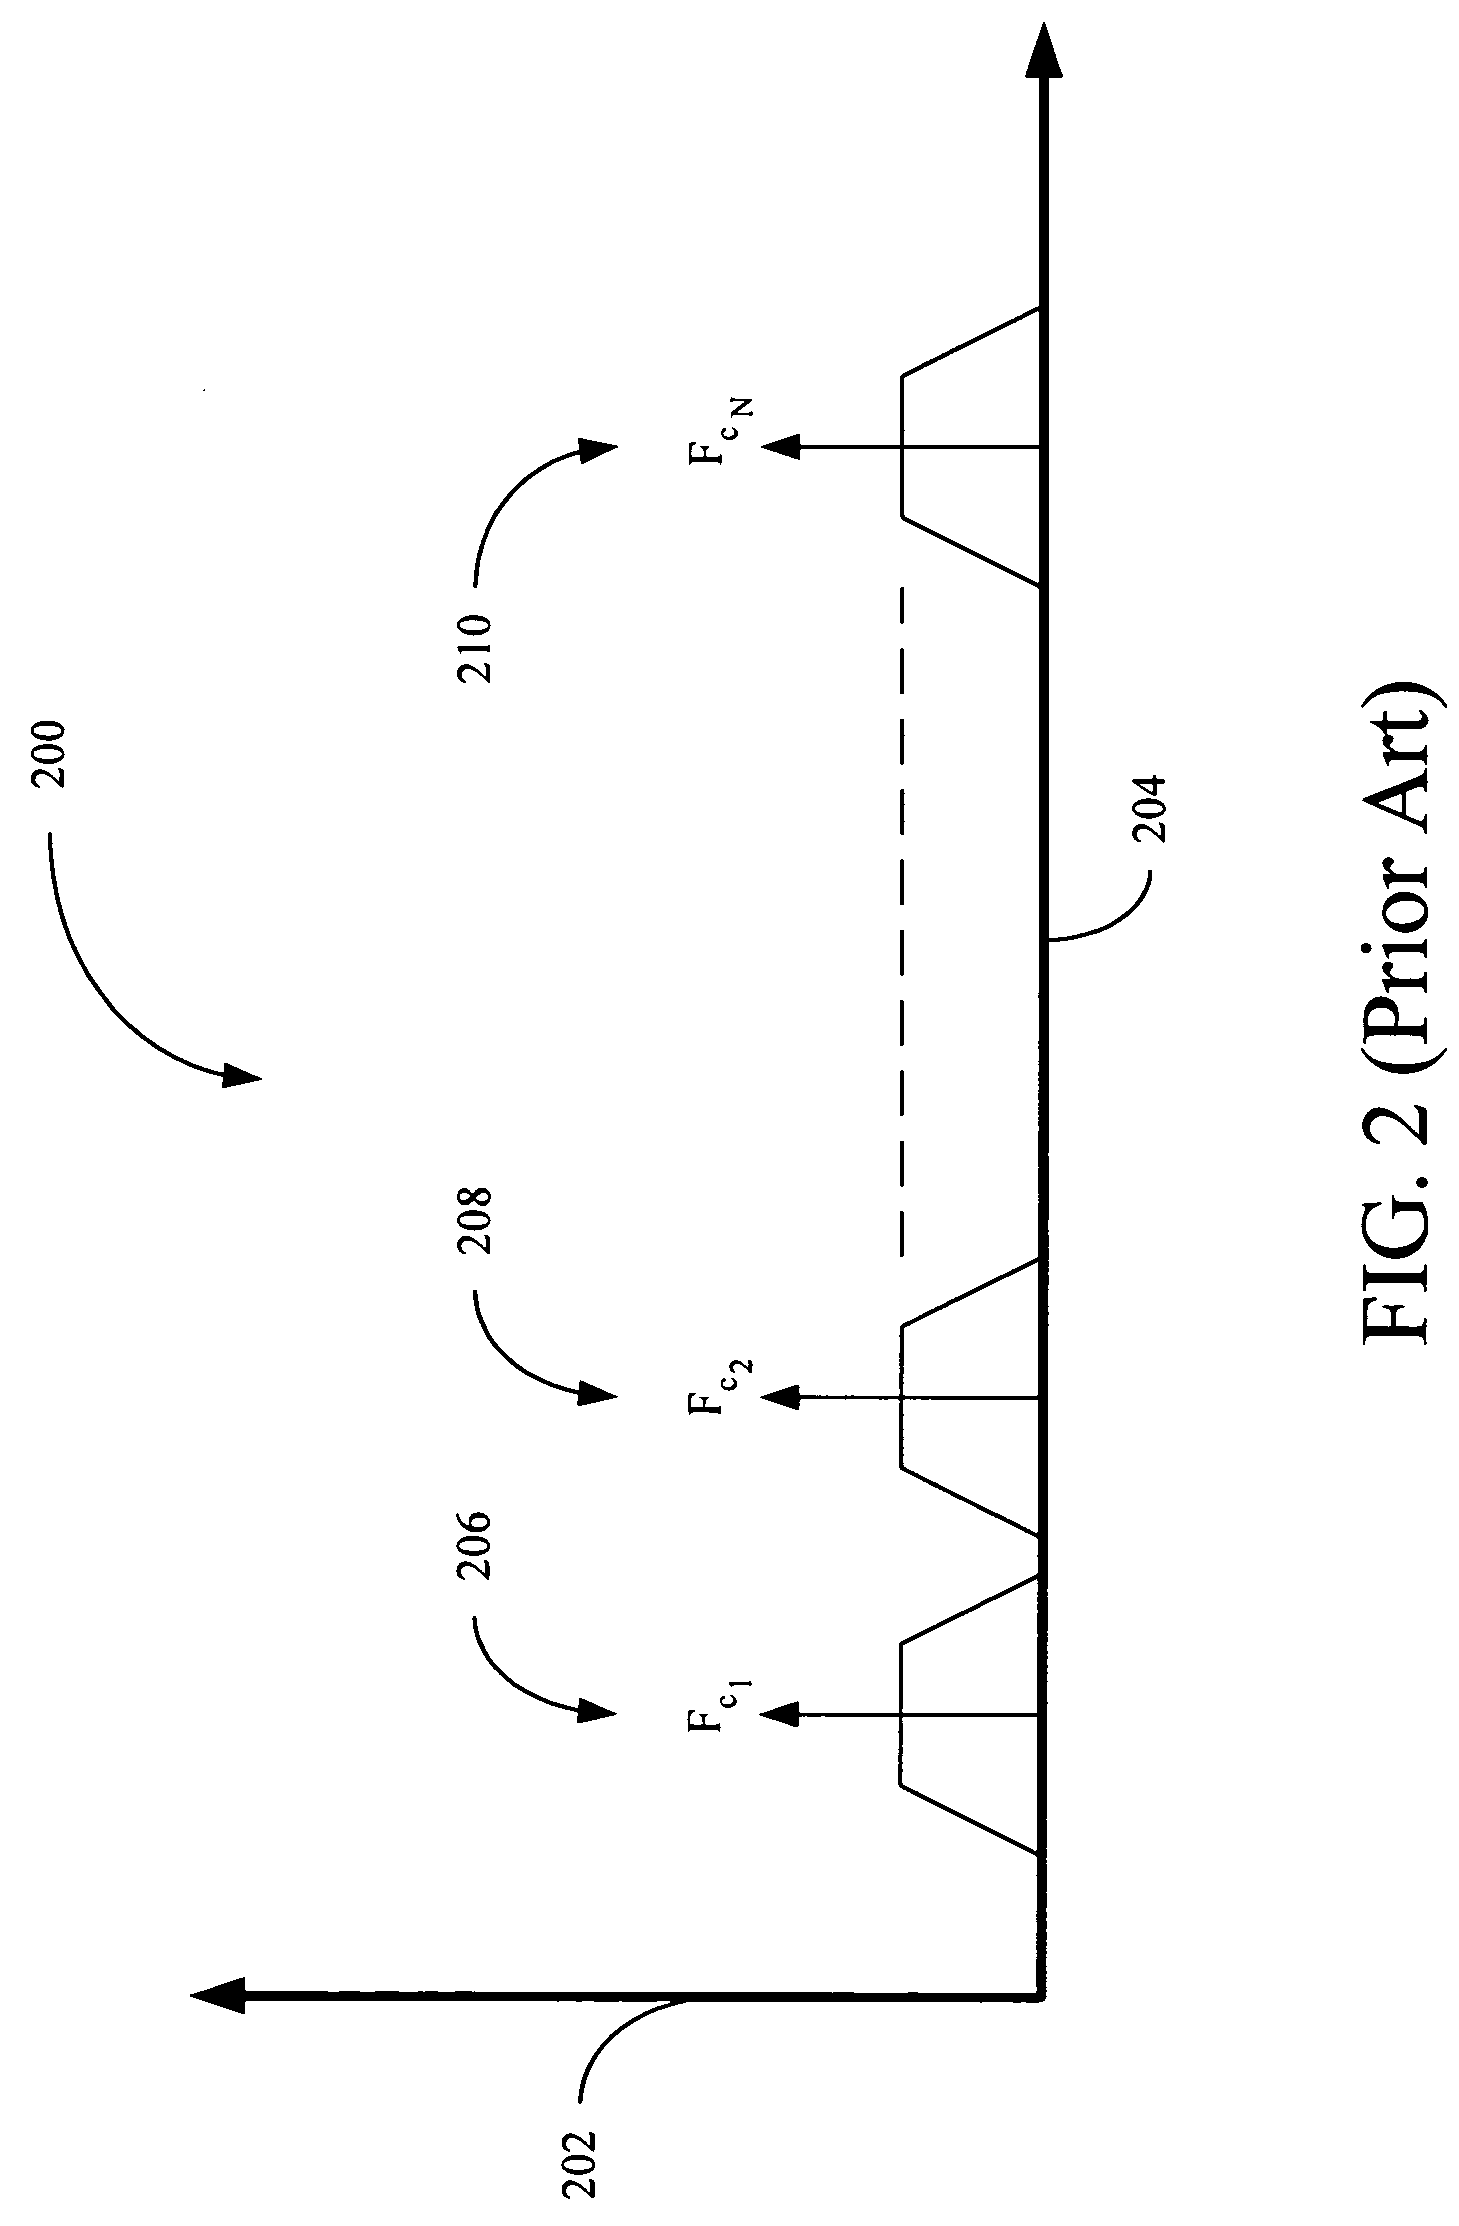 Simultaneous multiple channel receiver